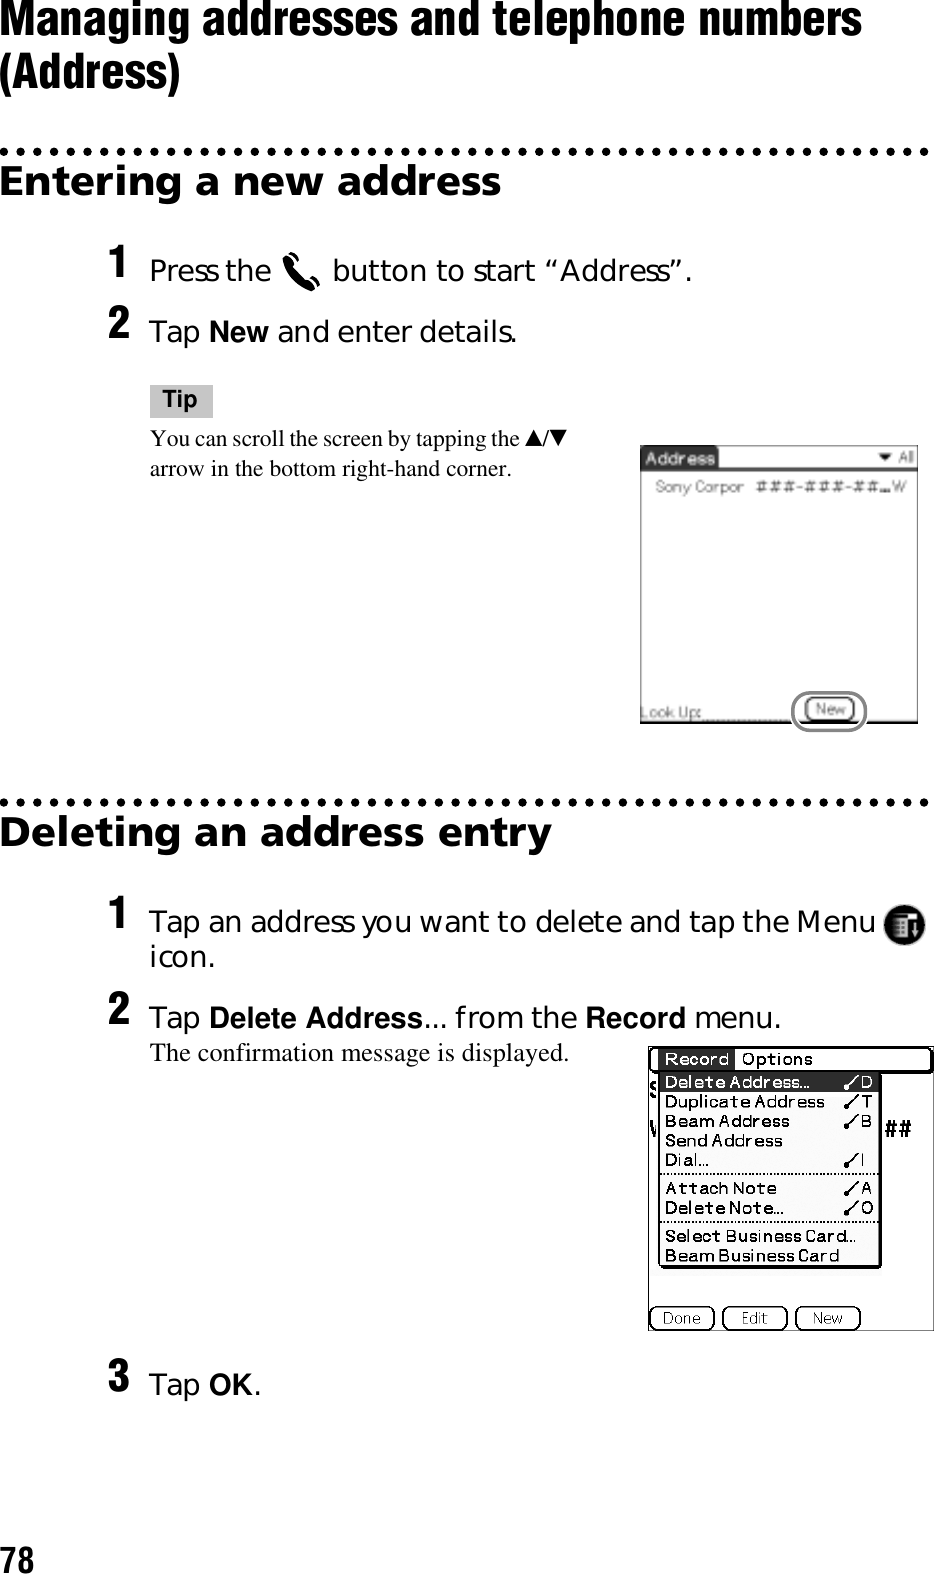 78Managing addresses and telephone numbers (Address)Entering a new addressDeleting an address entry1Press the   button to start “Address”.2Tap New and enter details.TipYou can scroll the screen by tapping the v/V arrow in the bottom right-hand corner.1Tap an address you want to delete and tap the Menu   icon.2Tap Delete Address... from the Record menu.The confirmation message is displayed.3Tap OK.